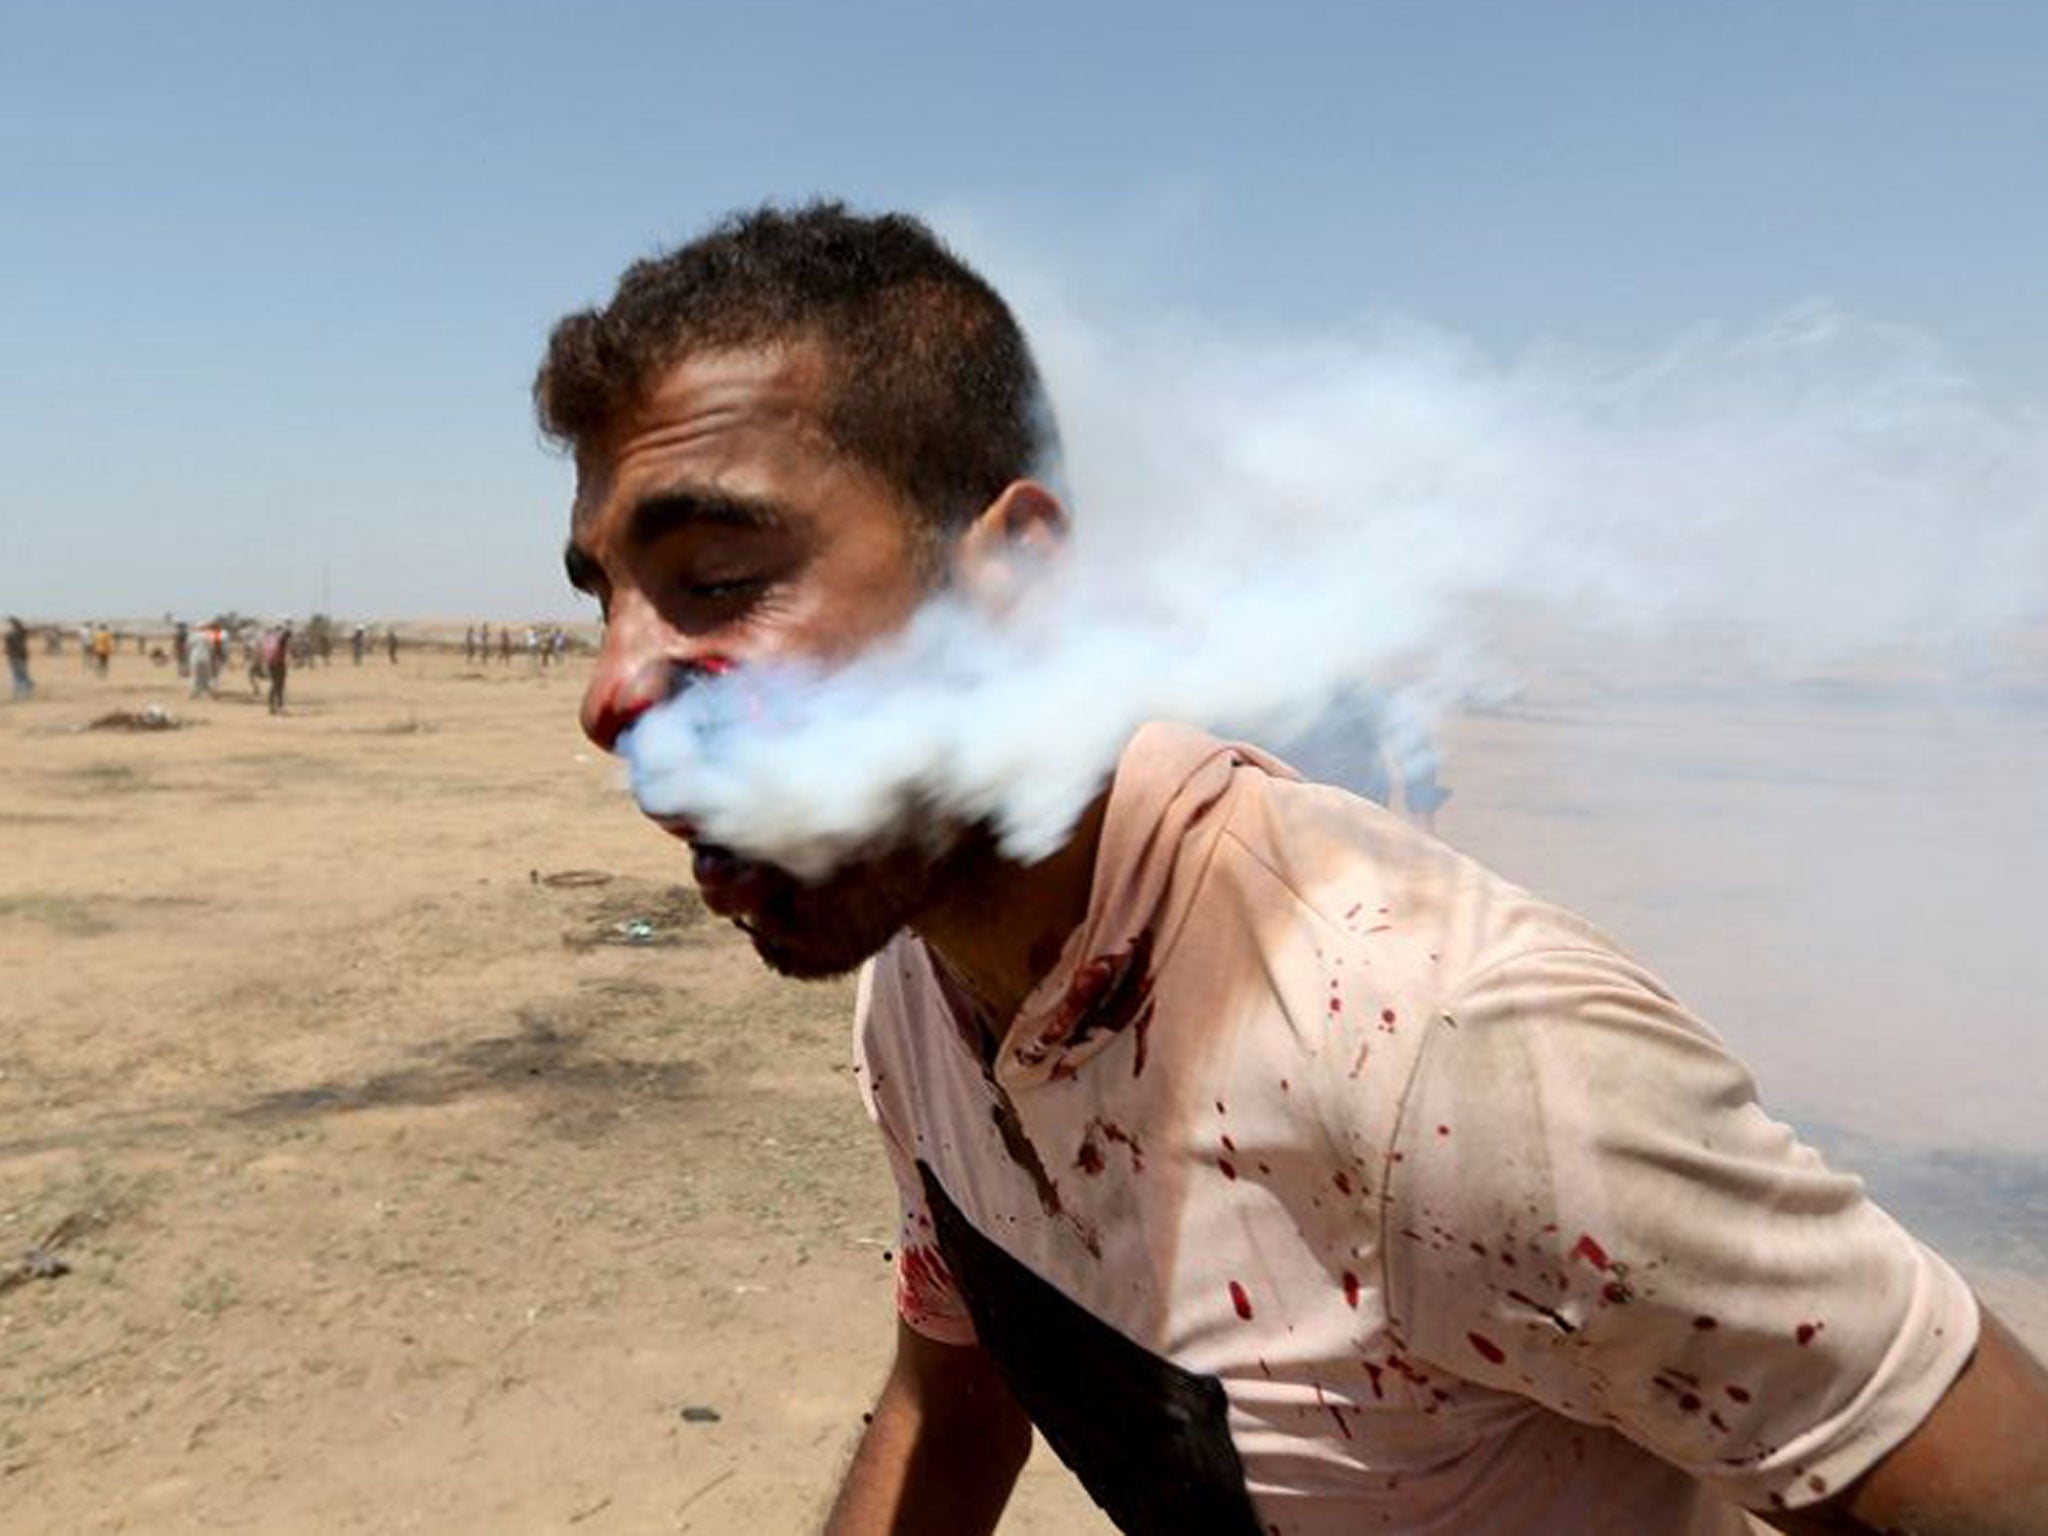 A wounded Palestinian demonstrator, Haitham Abu Sabla, 23, is hit in the face with a tear gas canister fired by Israeli troops